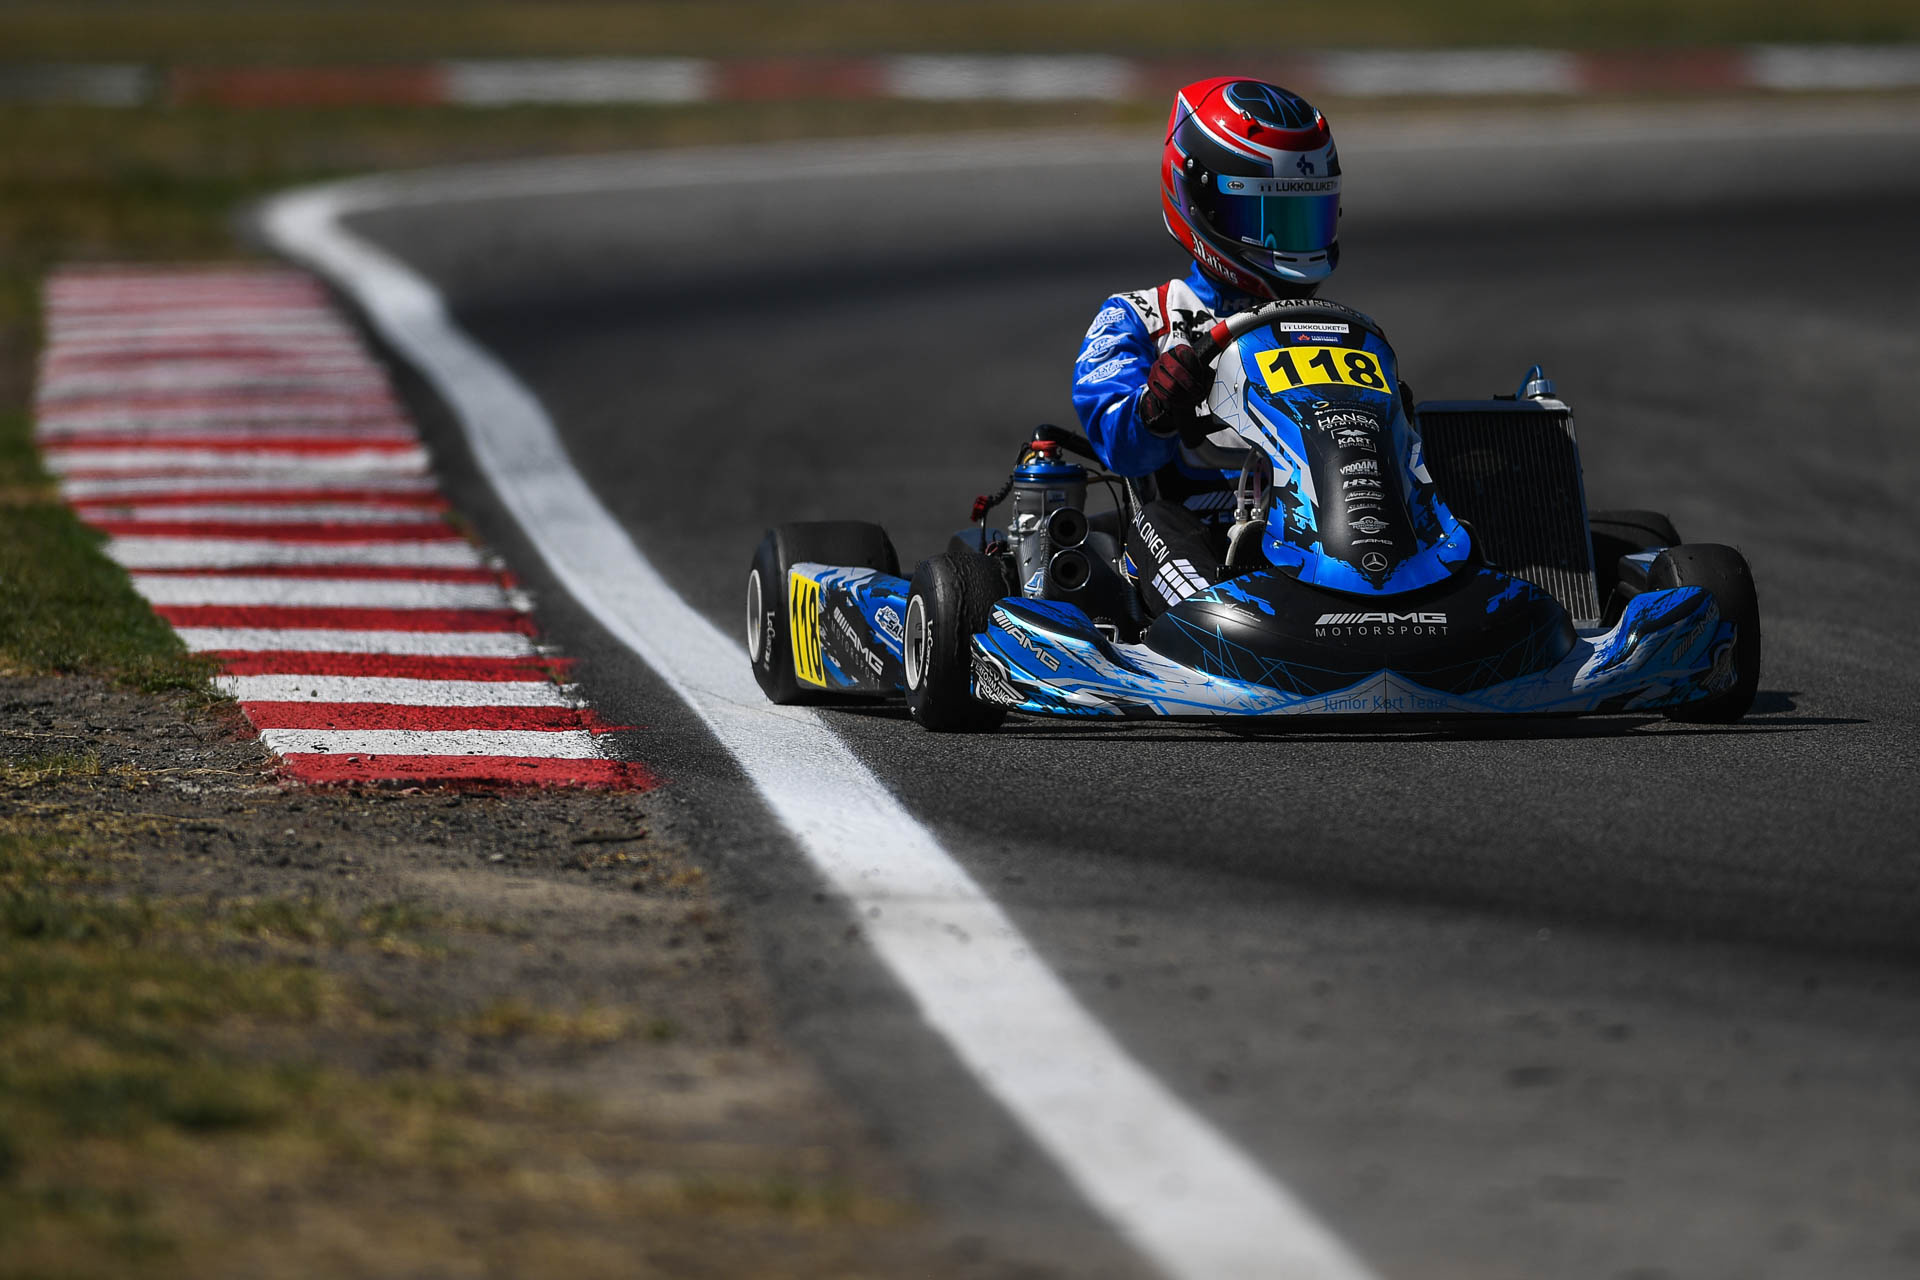 Karting: Final entry in the OK class, CVPG, Half-time of the FIA Karting European Championship. 1920x1280 HD Wallpaper.